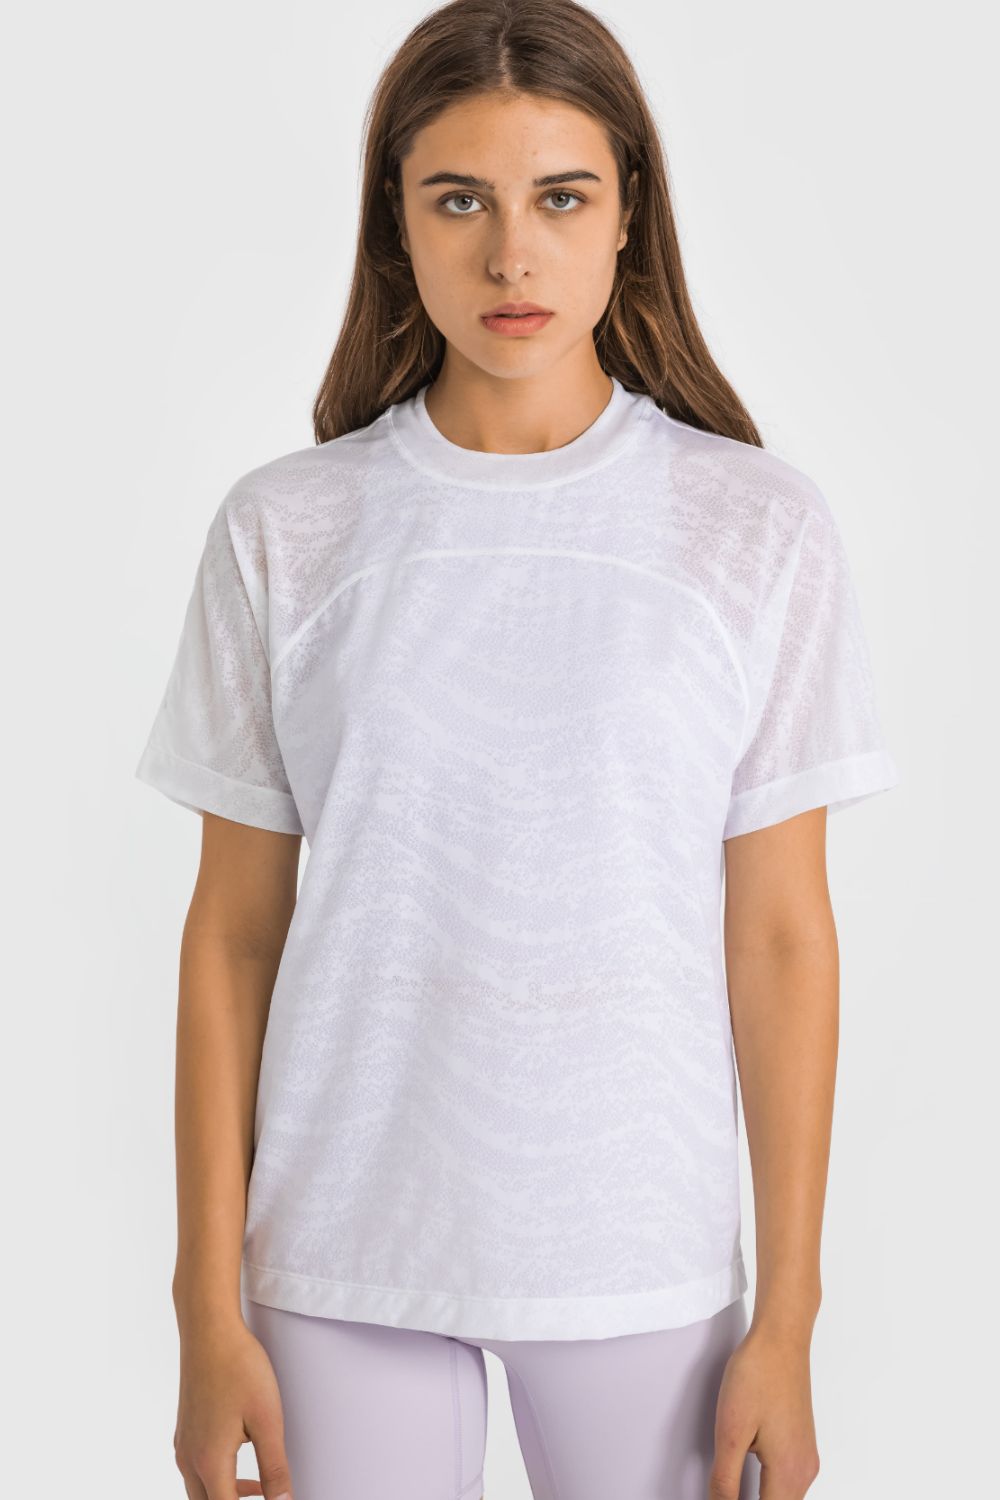 Breathable and Lightweight Short Sleeve Sports Top - Admiresty